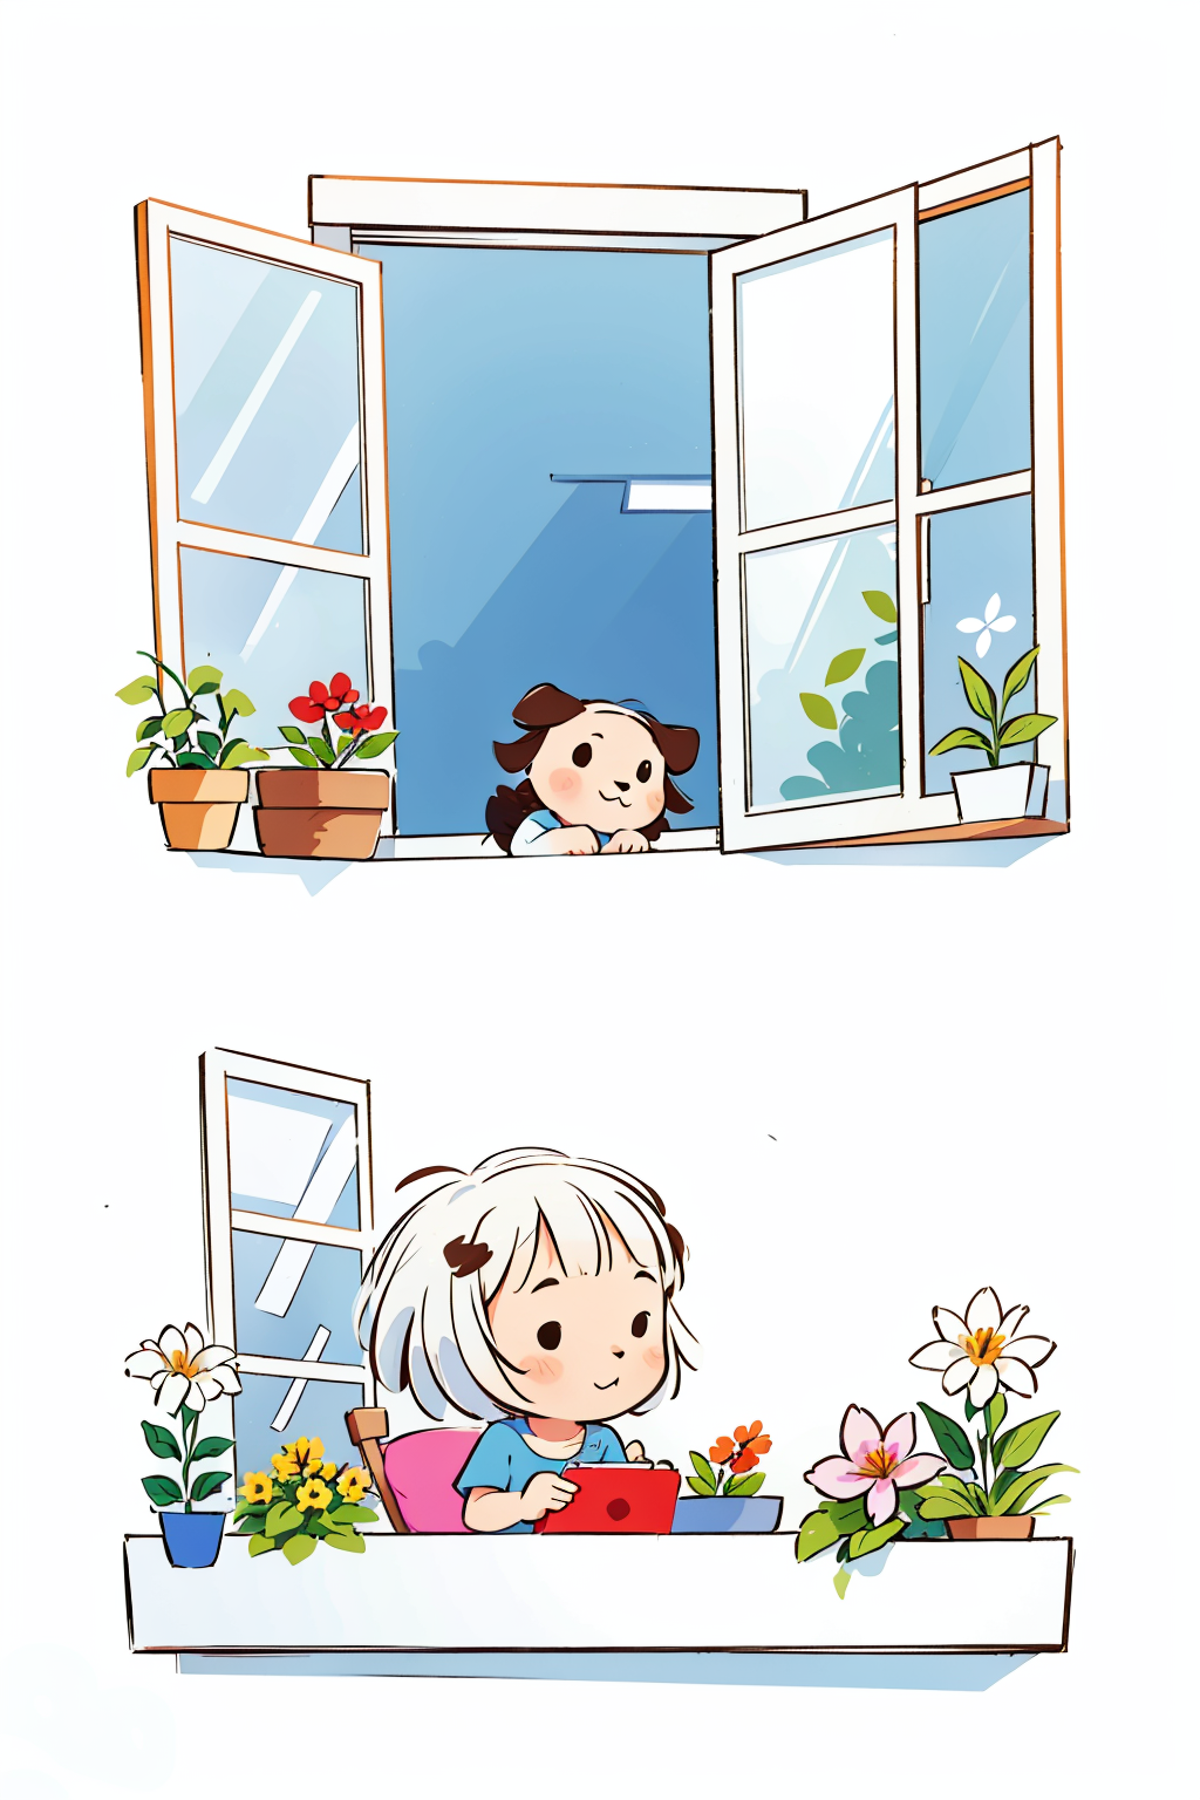 A little girl with white hair sitting in a chair, holding a tablet, and surrounded by potted plants.